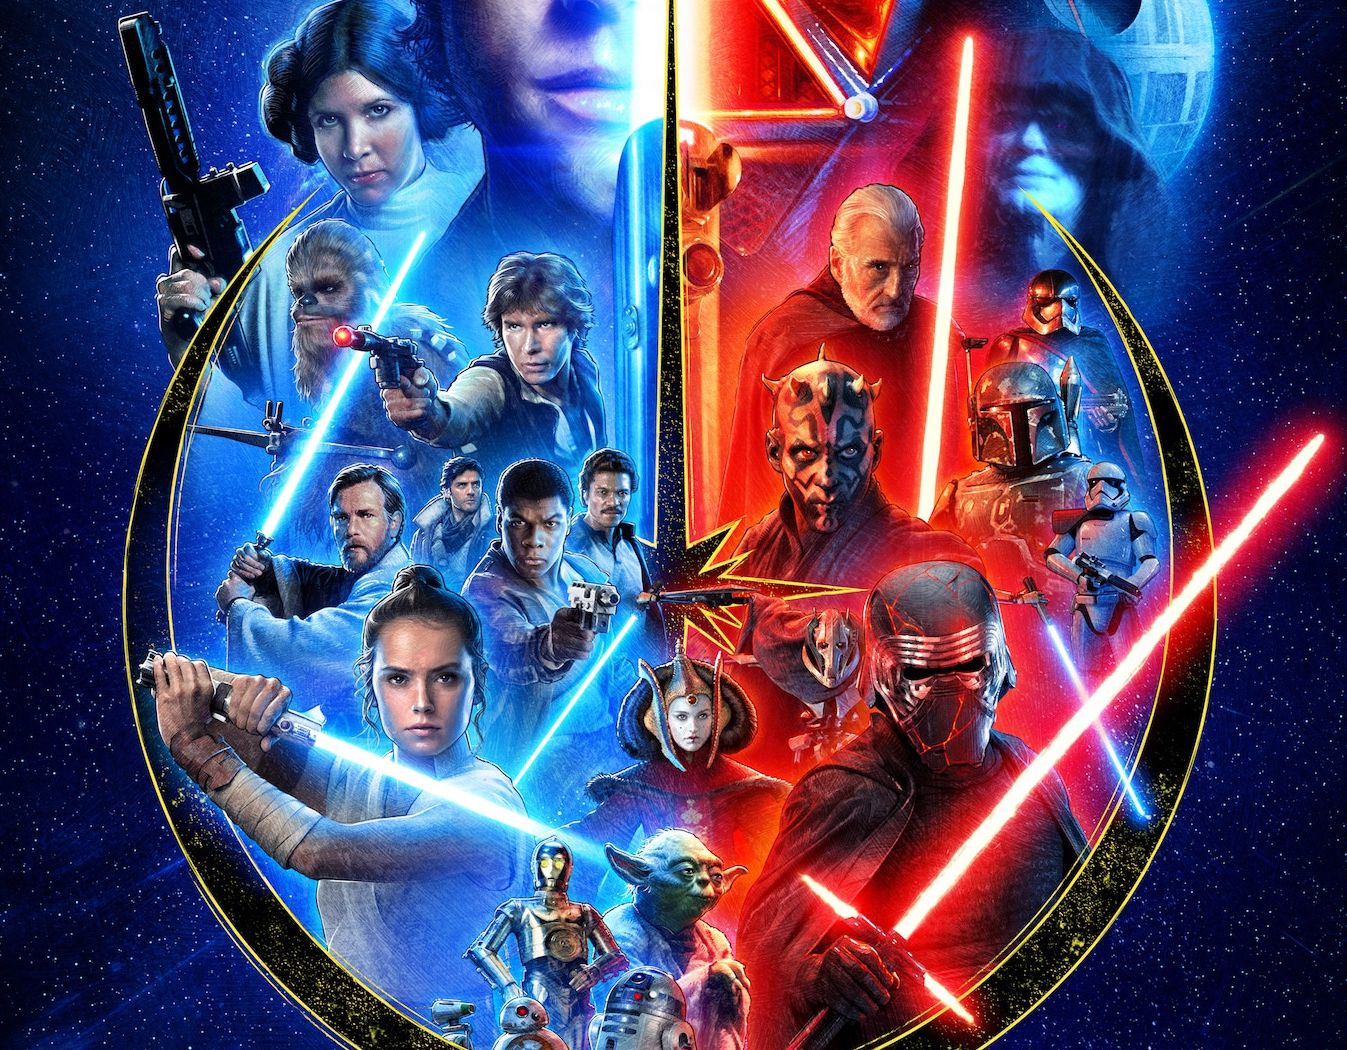 Unpopular Movie Opinions - Star Wars is just an American telenovela in space. No one is ever dead and everyone is somehow related.